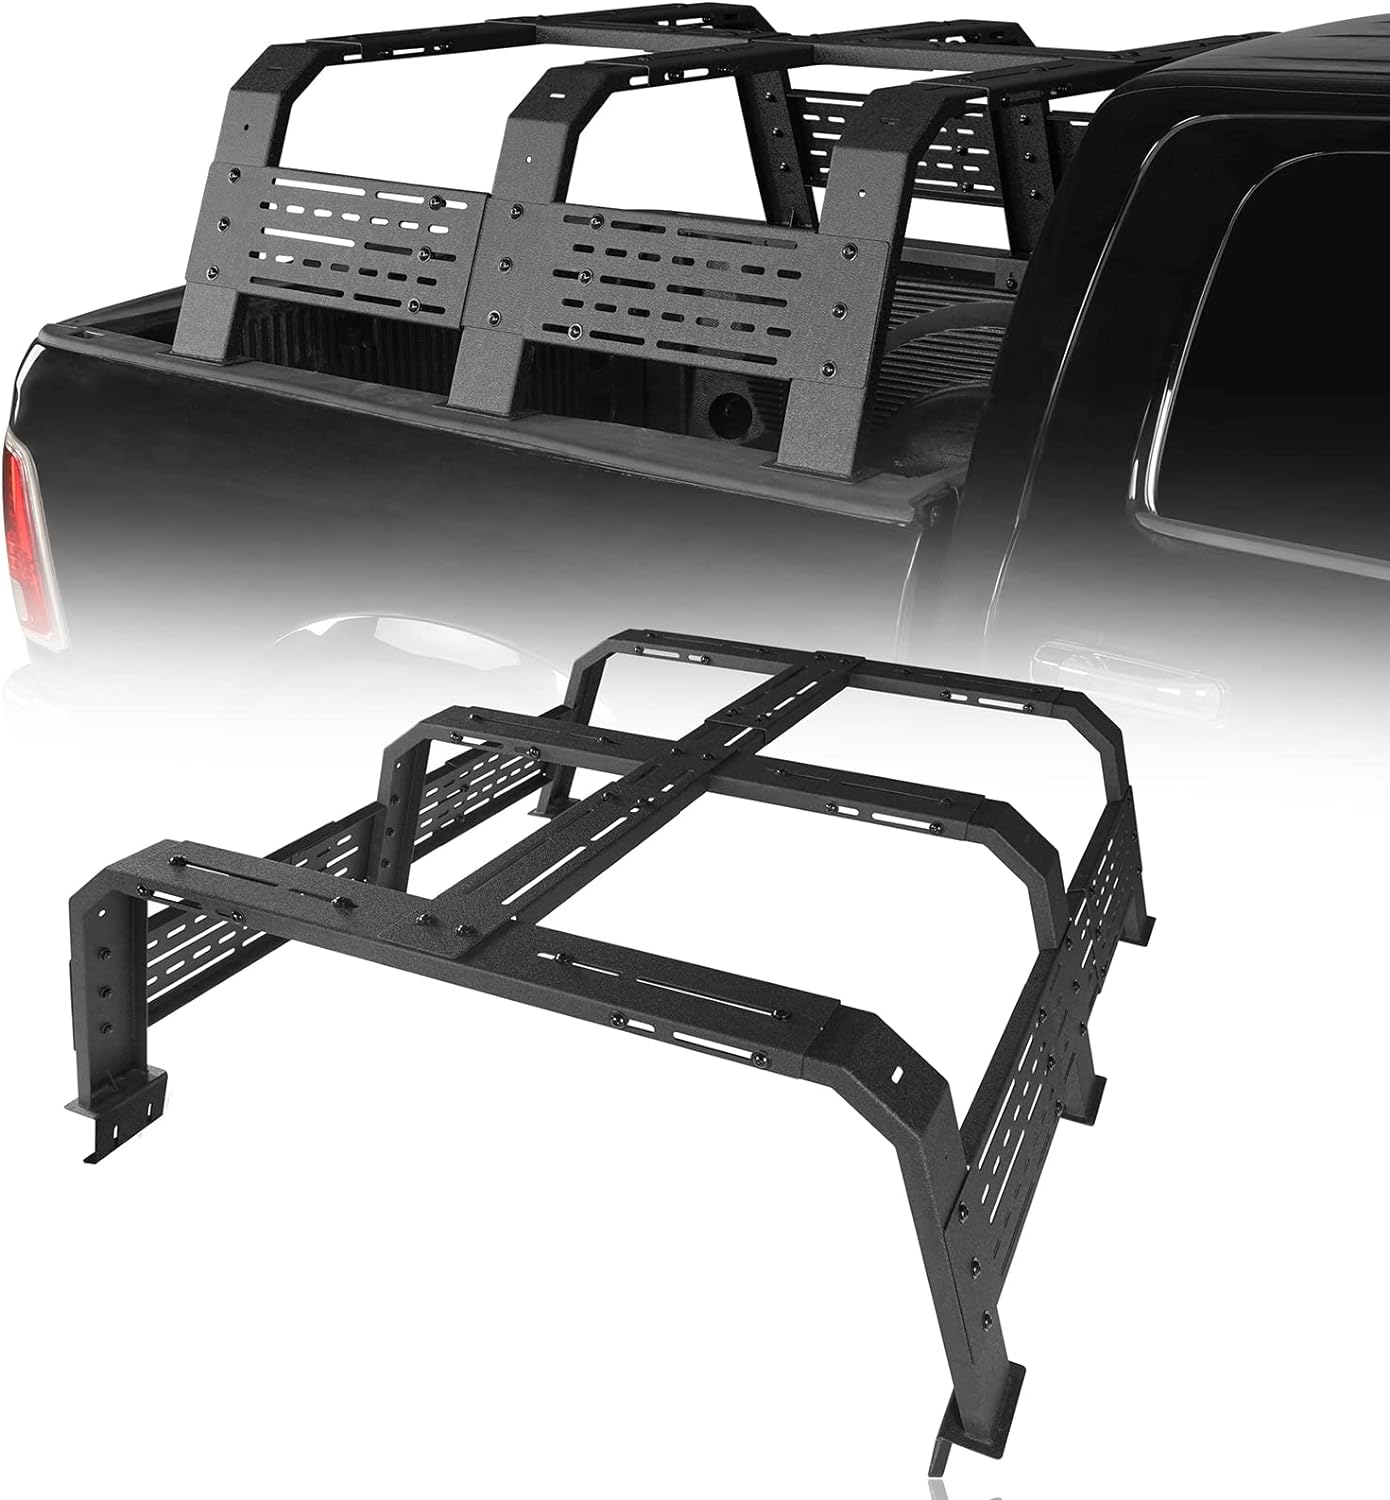 12.2" /18.8'' High Overland Bed Rack for Full-Size Trucks Compatible with Ford F-150 & Raptor, Dodge Ram 1500, Chevy Silverado 1500, GMC Sierra 1500